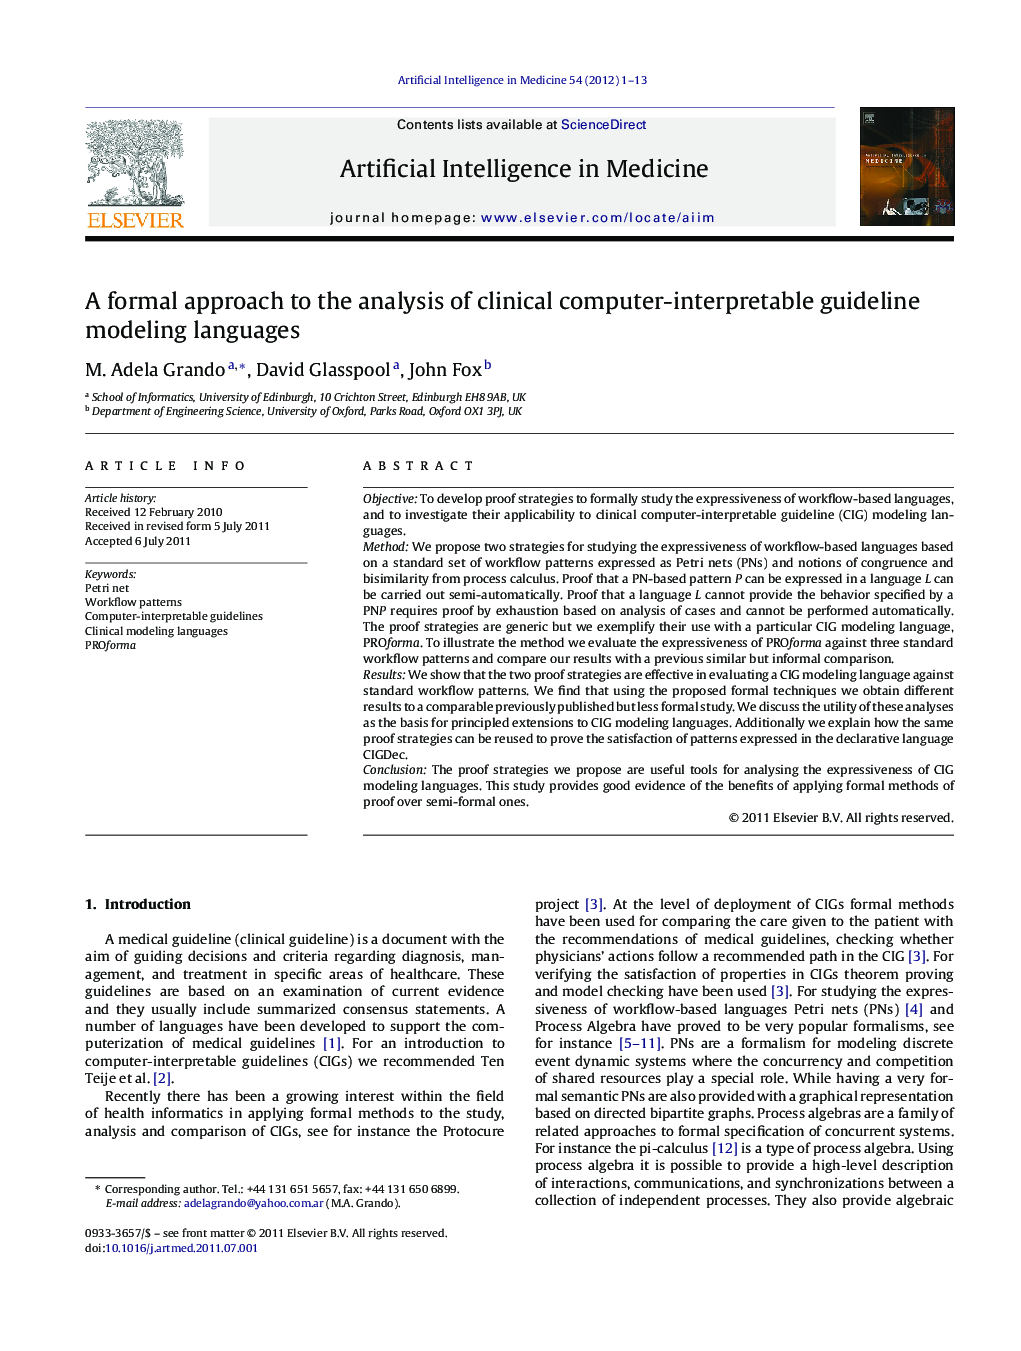 A formal approach to the analysis of clinical computer-interpretable guideline modeling languages